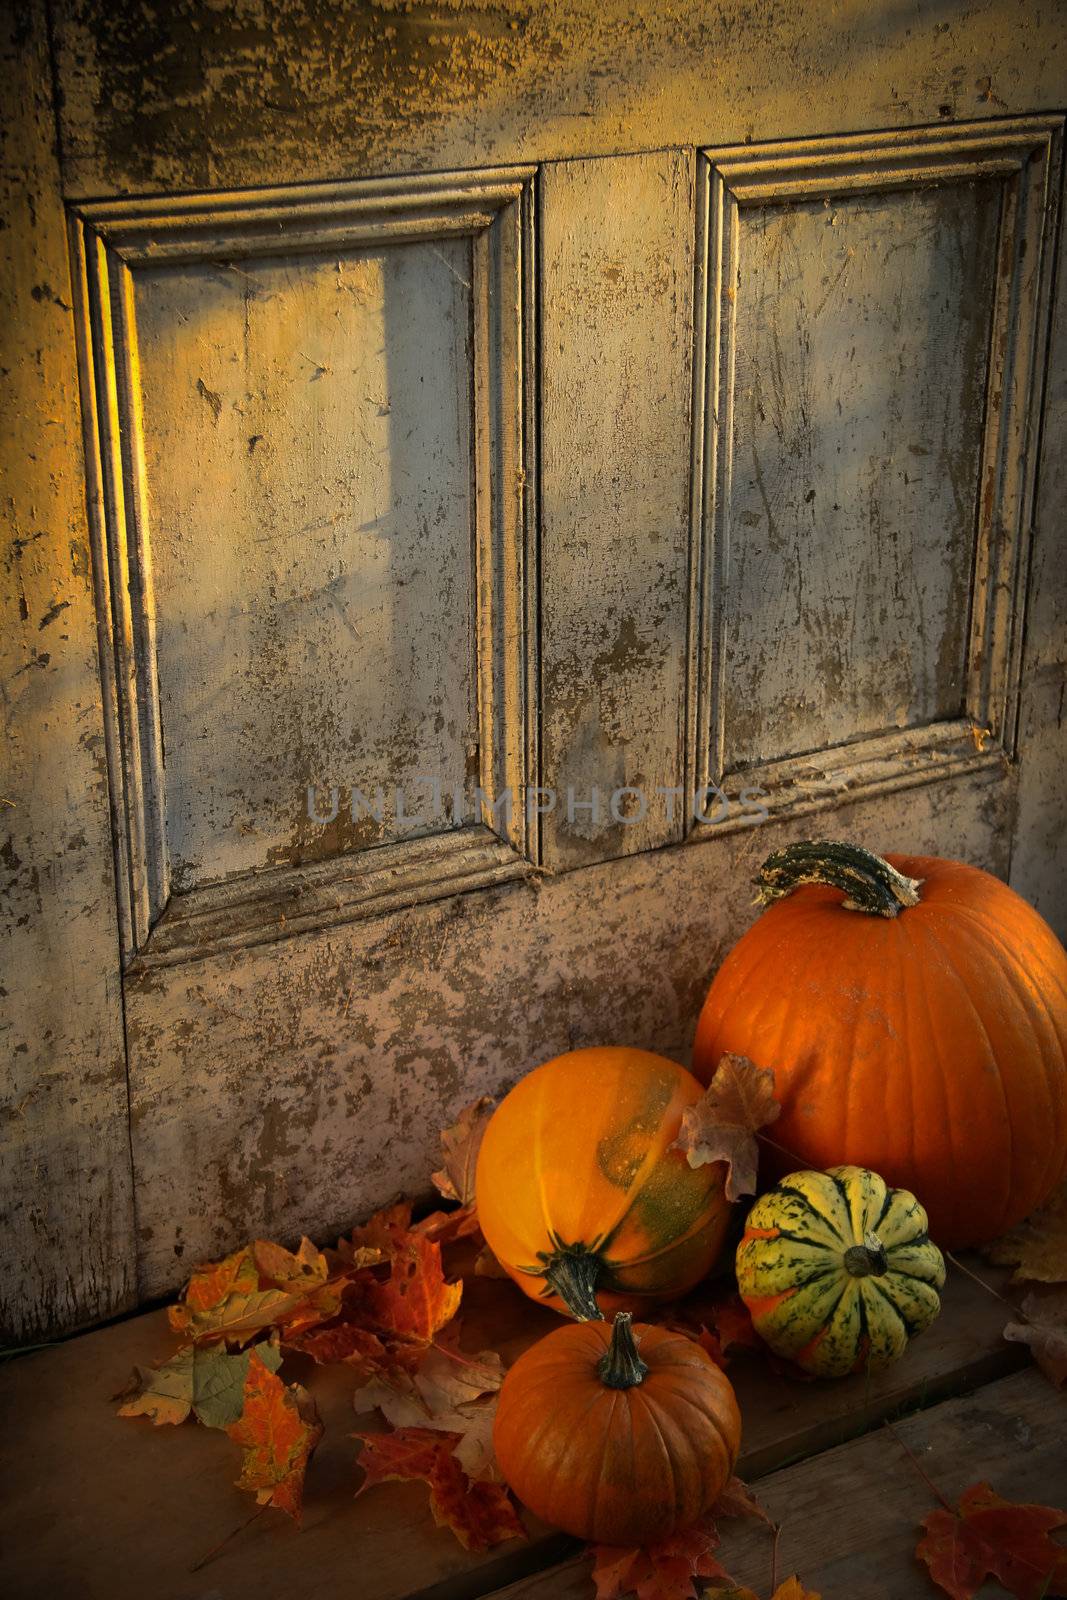 Pumpkins, broom and gourds at the door  by Sandralise